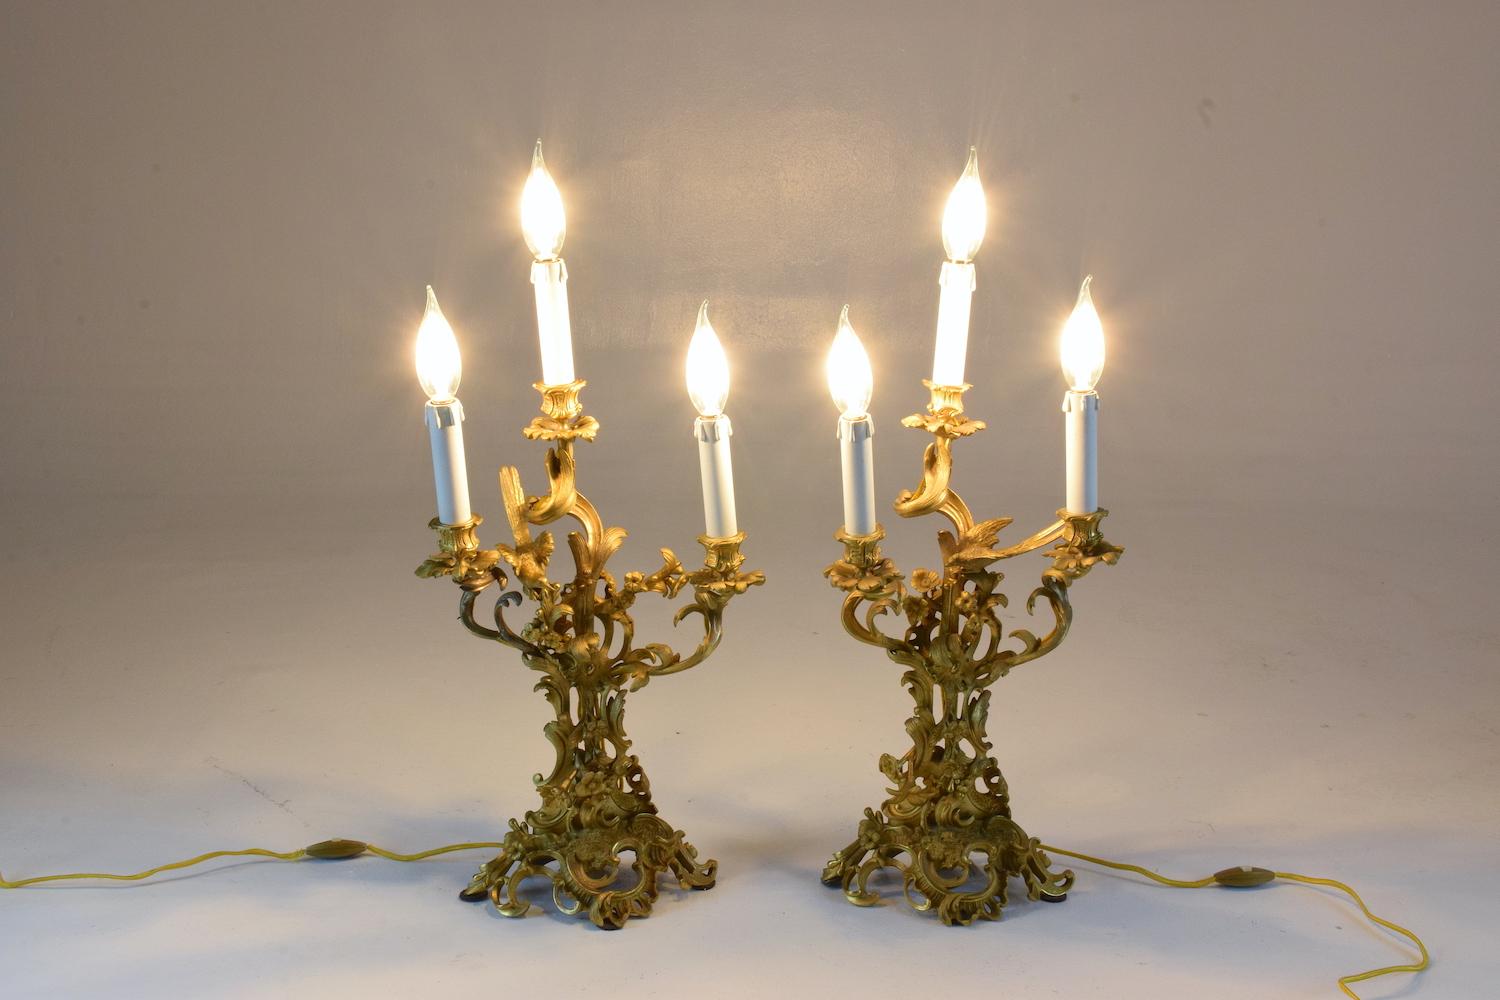 A pair of french antique mid-19th century Louis VXI Rocaille style electrified three-arm candelabra lamps entirely mounted in ormolu bronze doré. The ormolu is meticulously crafted with a beautifully gilt foliage of s scrolls, leafs, birds and